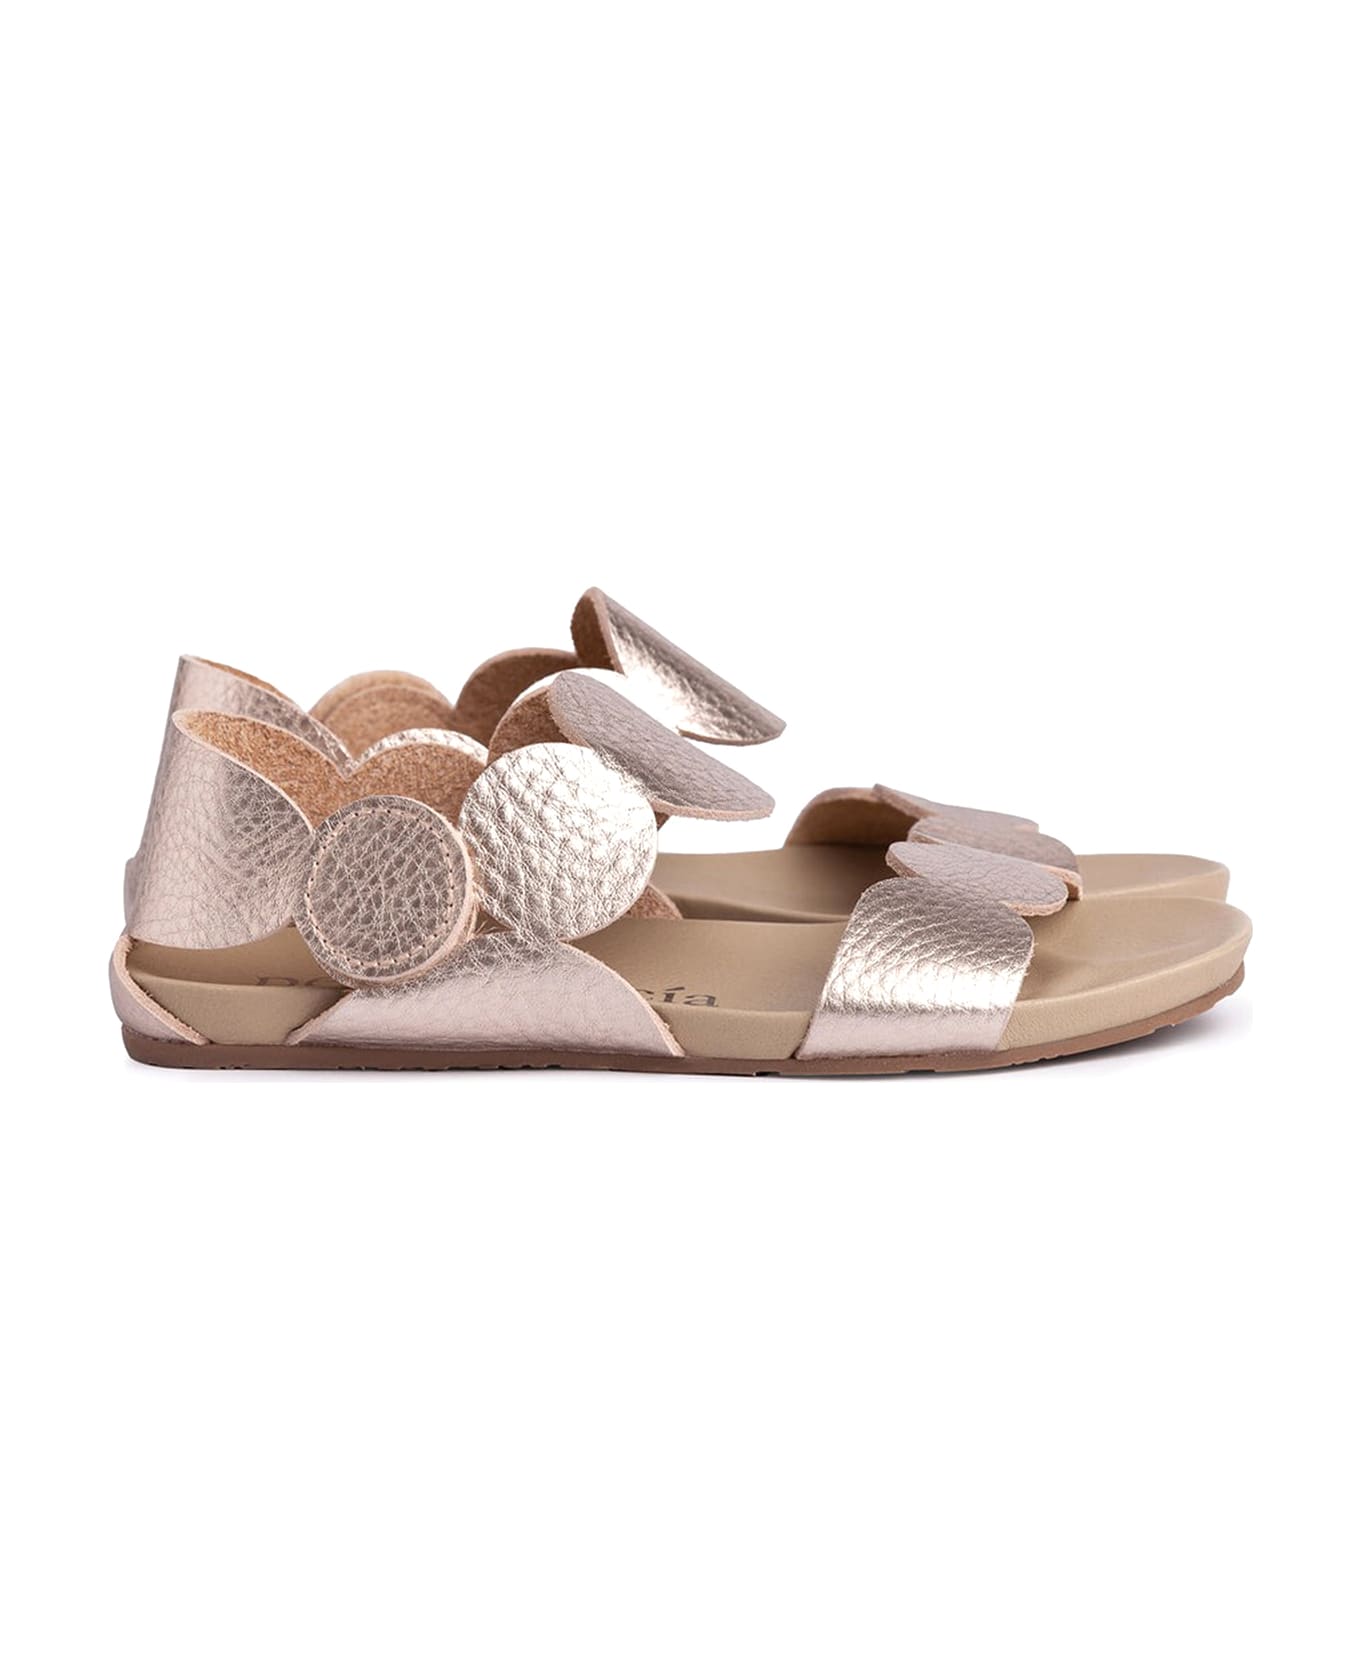 Pedro Garcia Jeanne Sandal In Laminated Grained Leather - SIROCCO